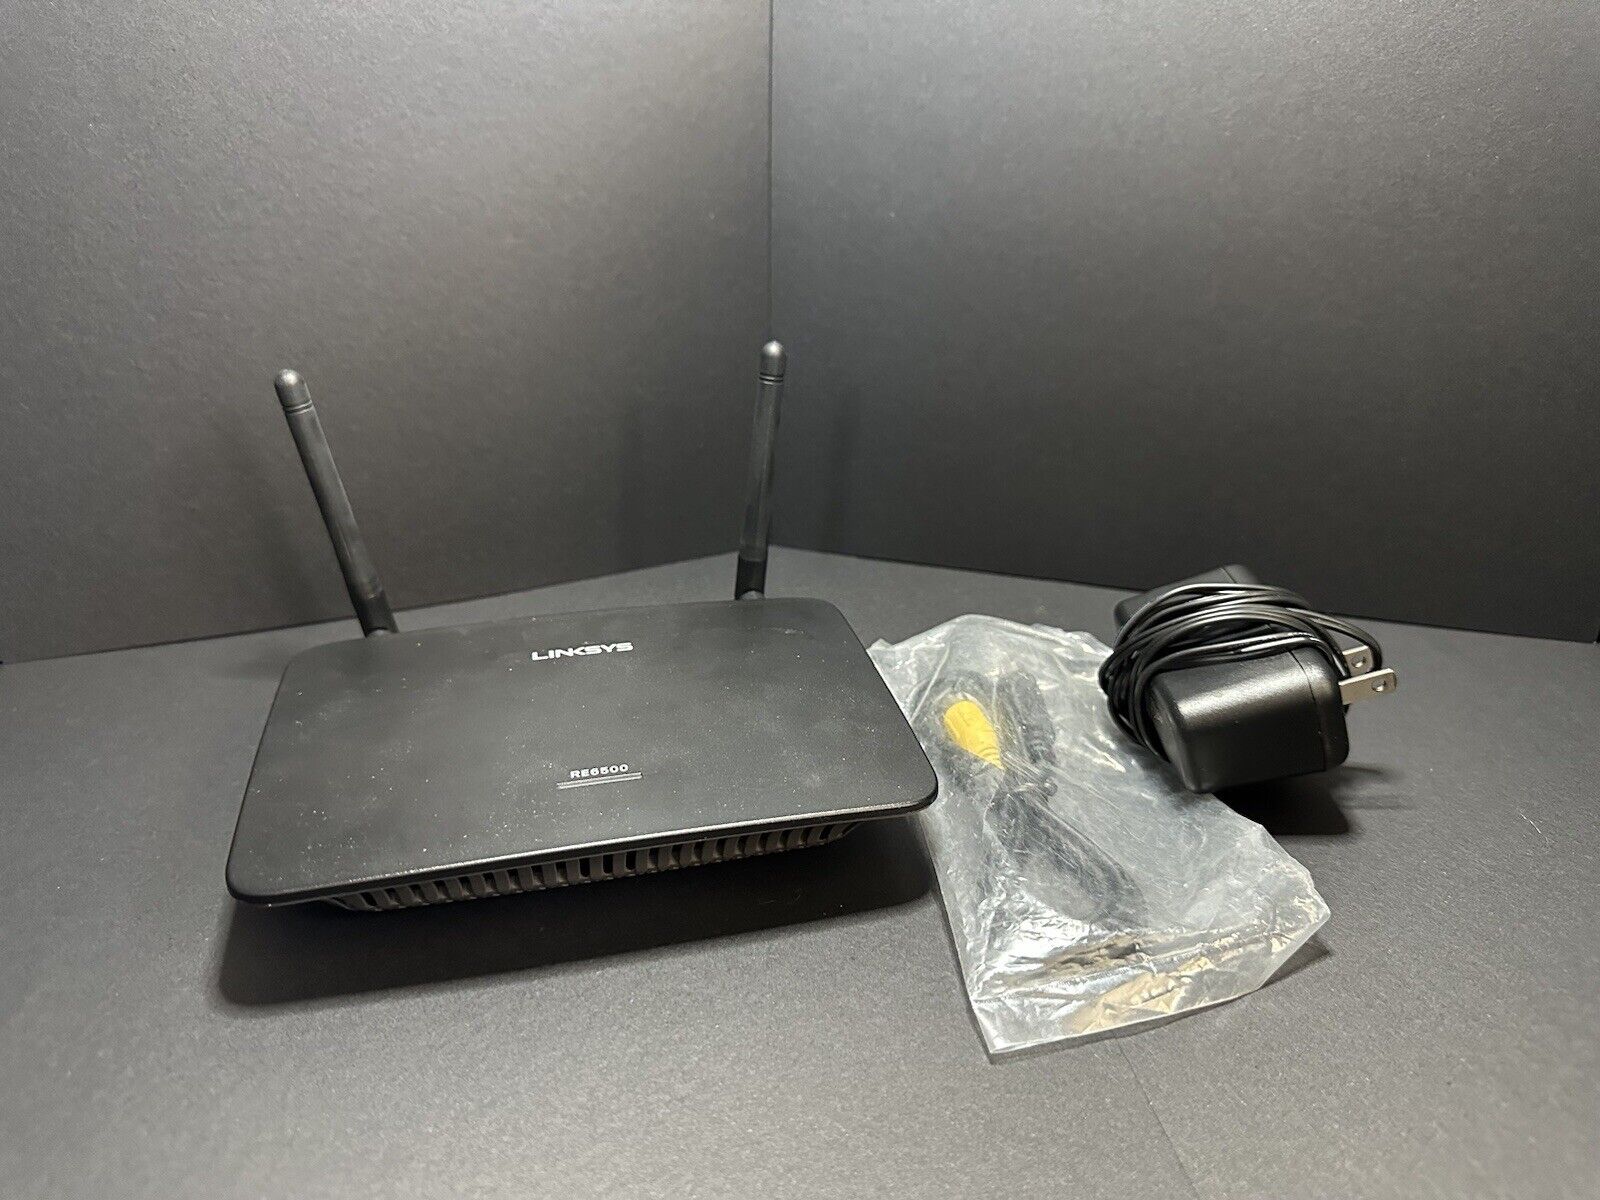 Linksys RE6500 AC1200 MAX Wi-Fi Range Extender with power cord